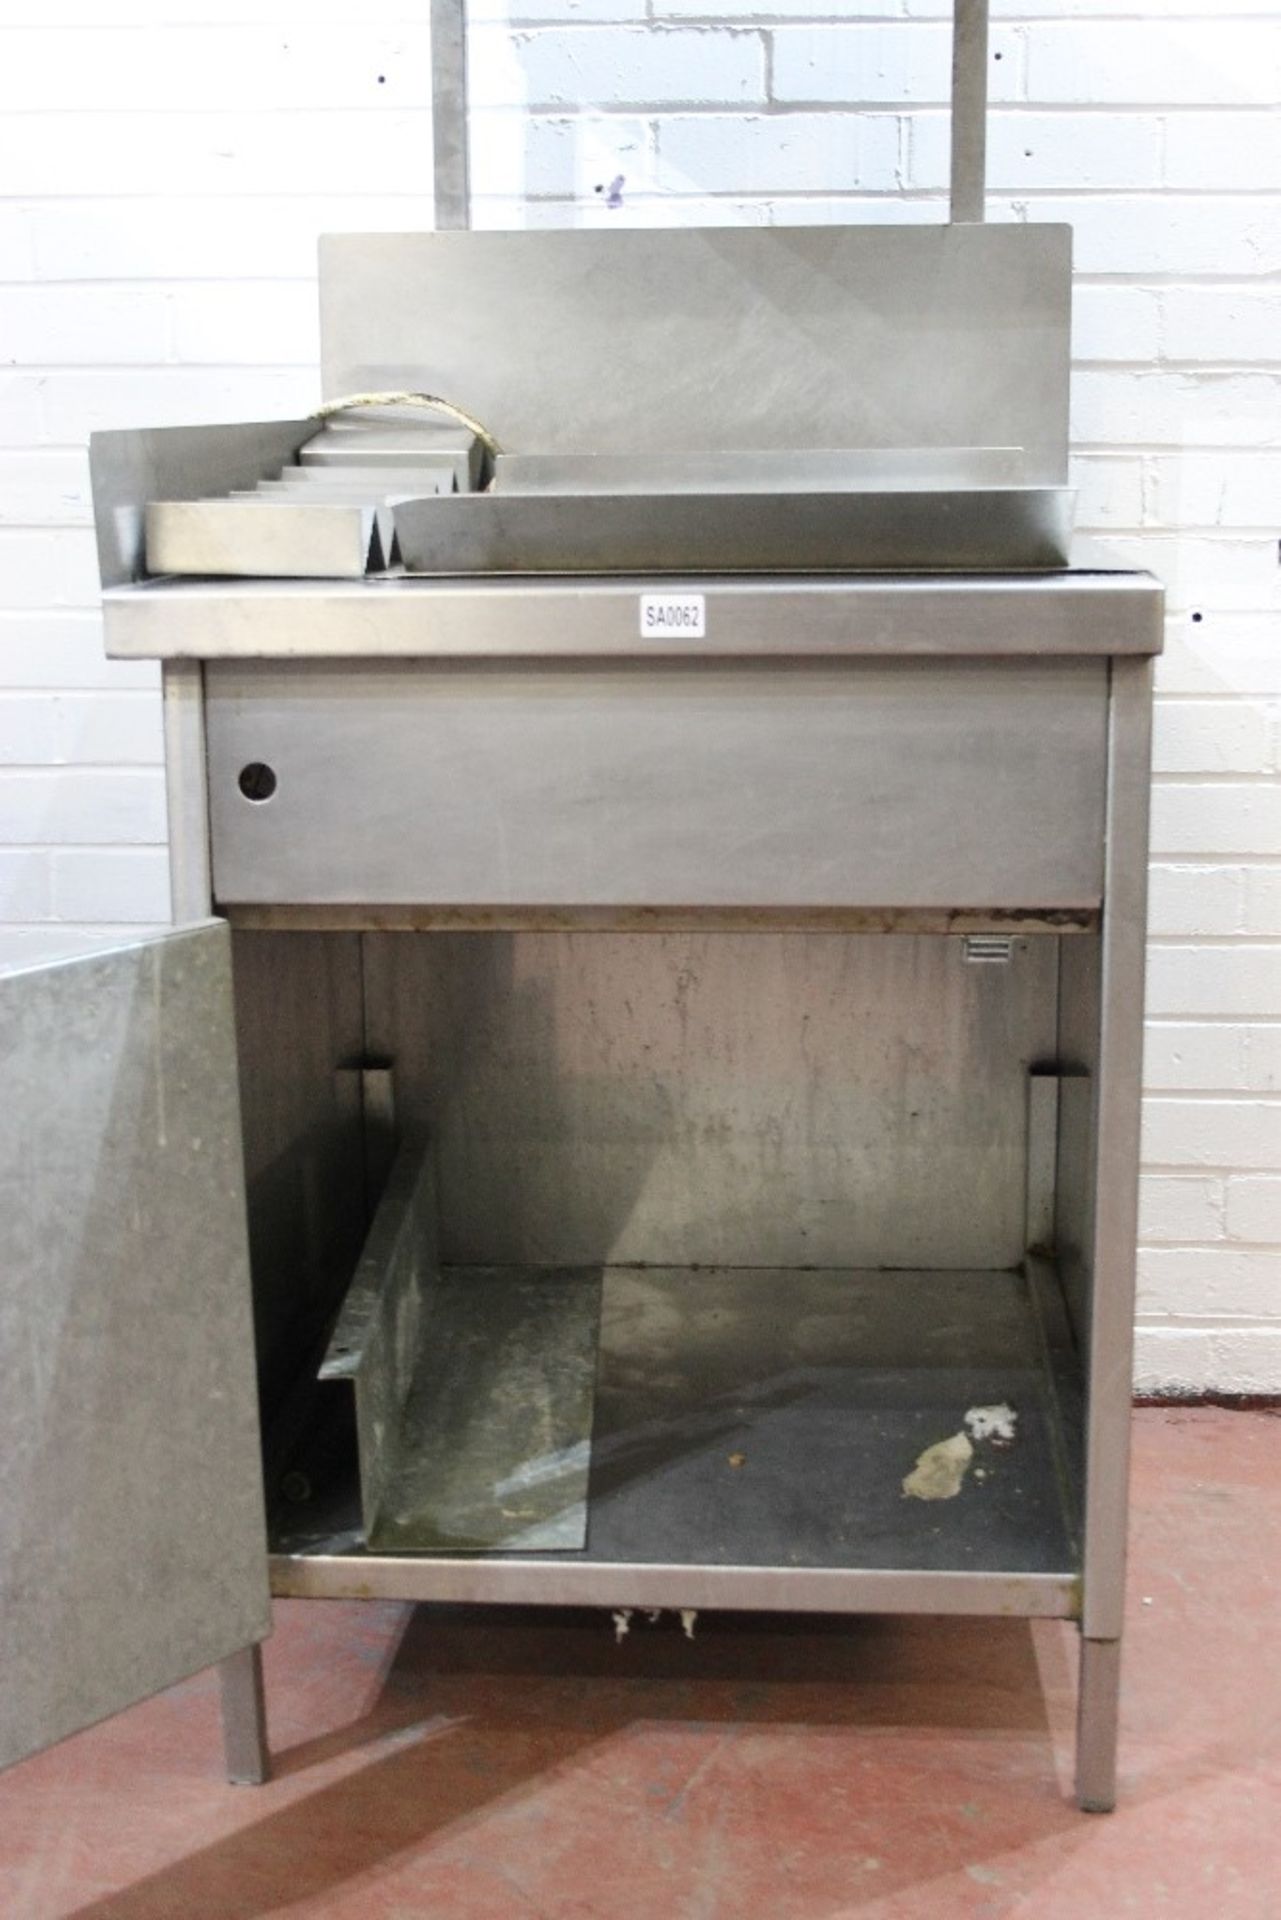 Stainless Steel Mobile Chip Scuttle with Heat Lamps +   Under Storage -1ph – W65cm x H140cm x D70cm - Image 3 of 4